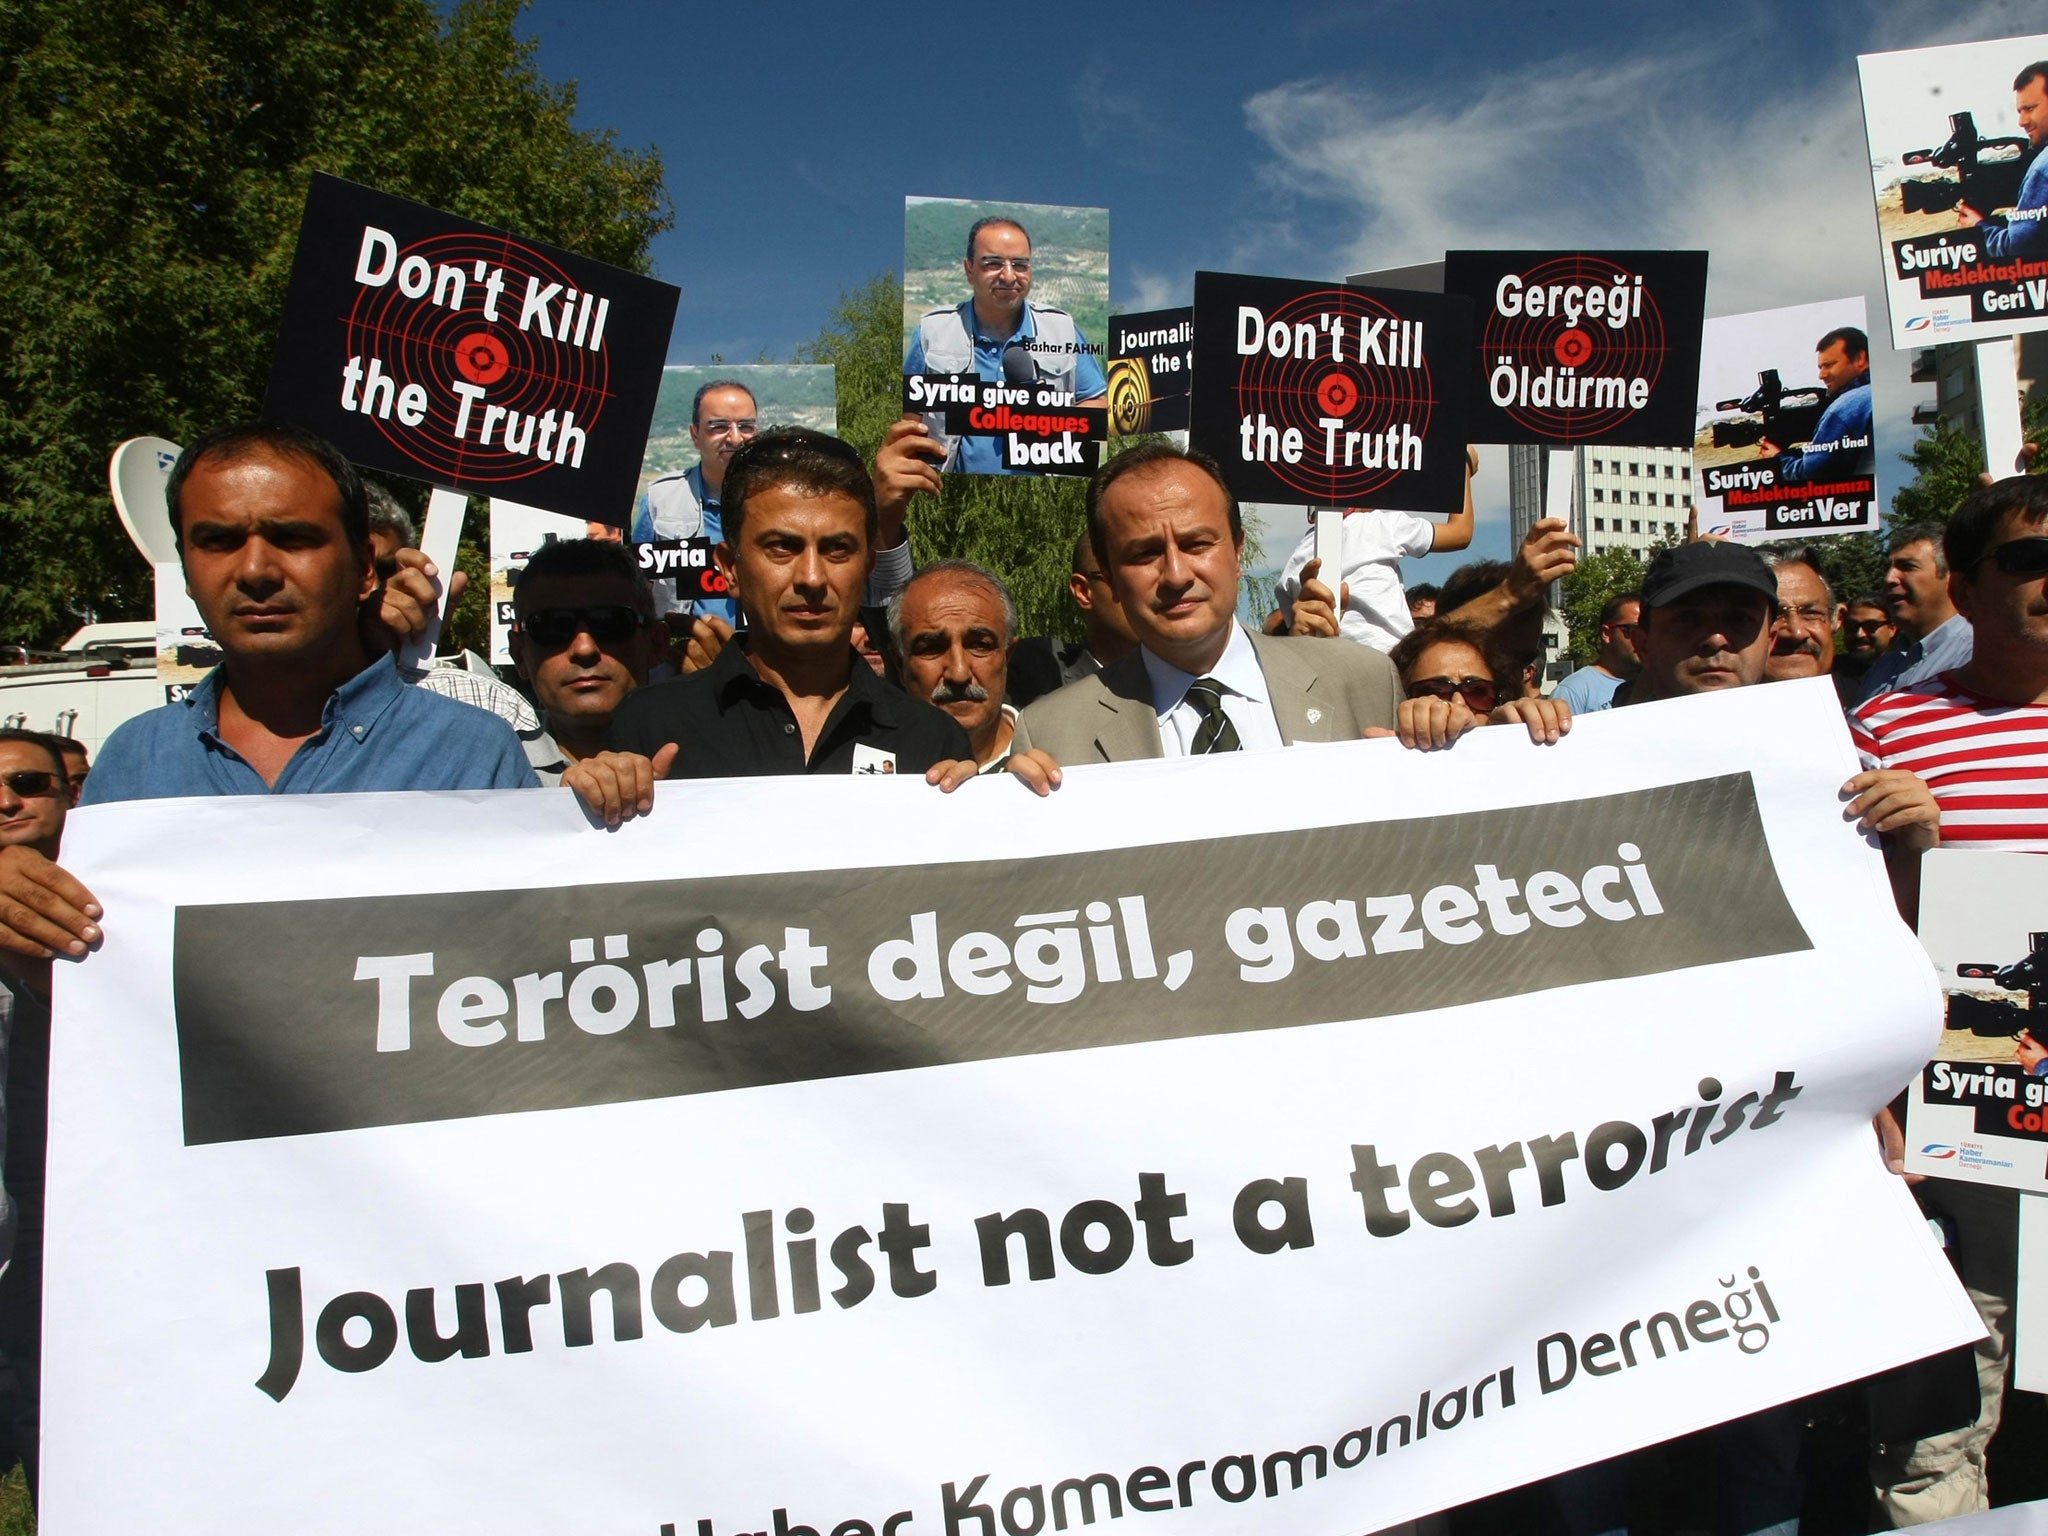 More than 100 Turkish journalists protest in front of the Syrian Embassy in Ankara on August 31, 2012, to demand the release of two Turkish reporters, cameraman Cuneyt Unal and TV correspondent Bashar Fahmi, reportedly being held by the regime of Syrian President Bashar al-Assad. Turkish cameraman Cuneyt Unal and his colleague Bashar Fahmi, who both work for the US-funded al-Hurra network, have been missing in Syria for 11 days and are reportedly being held by government troops.